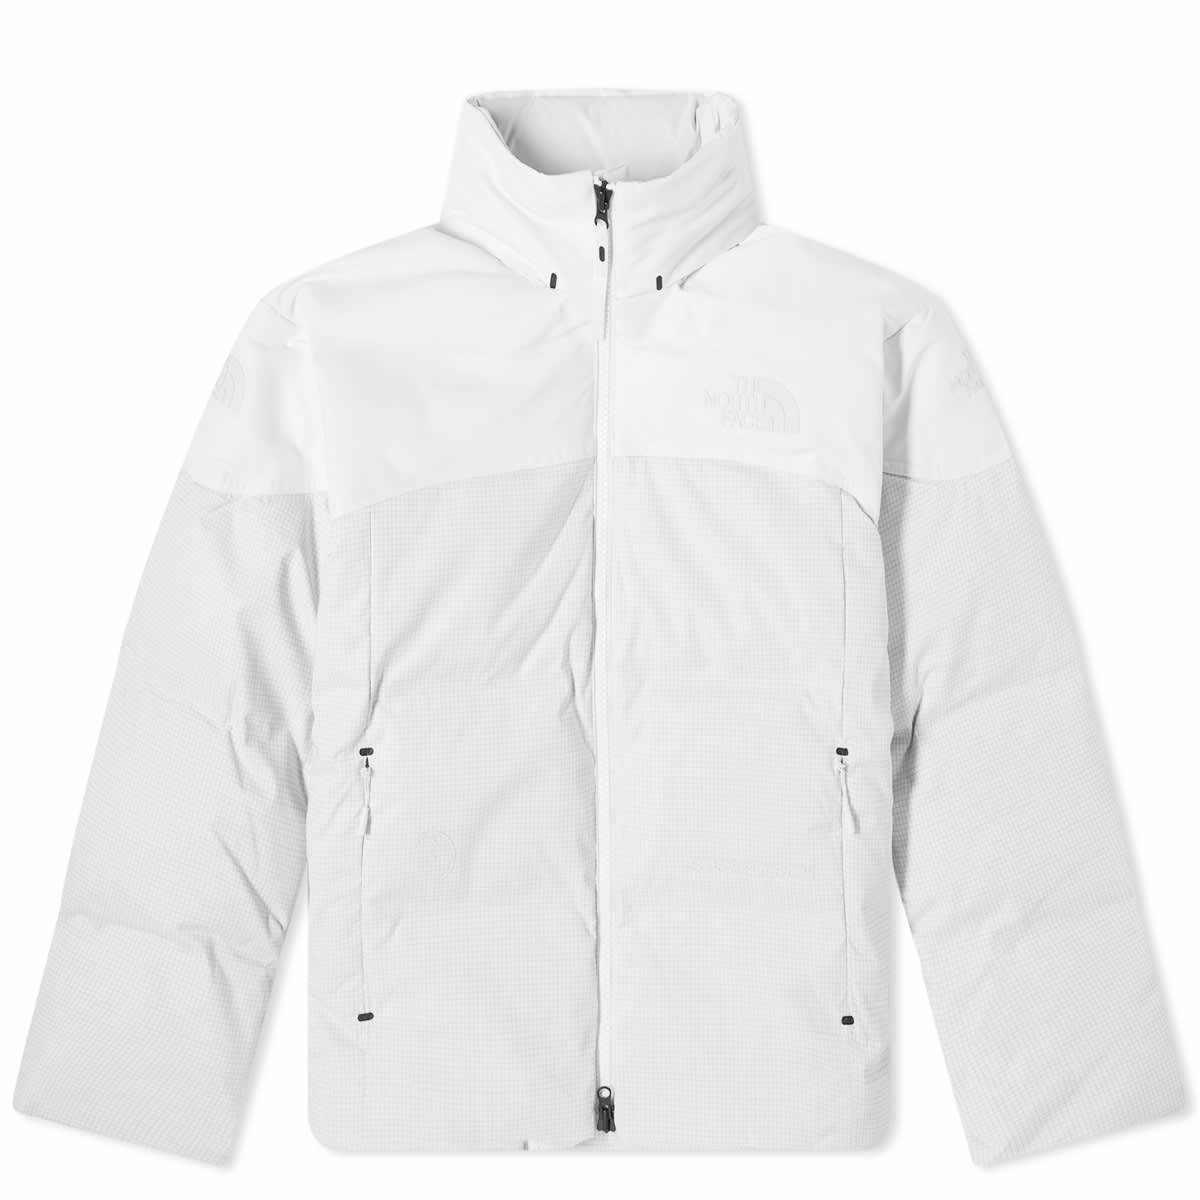 Mens Clothing The North Face, Style code: nf0a3xyd0401-white